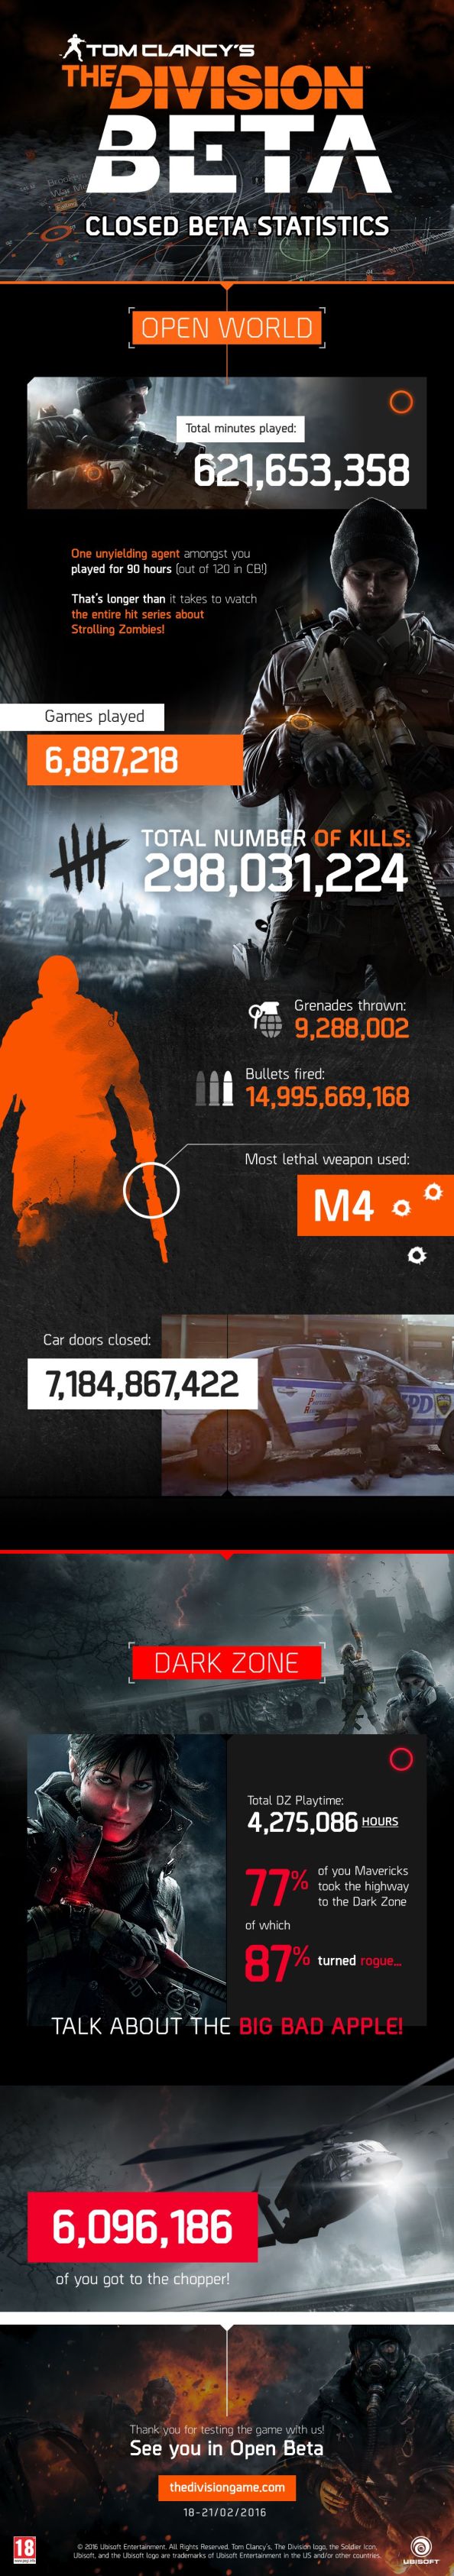 The Division beta infographic